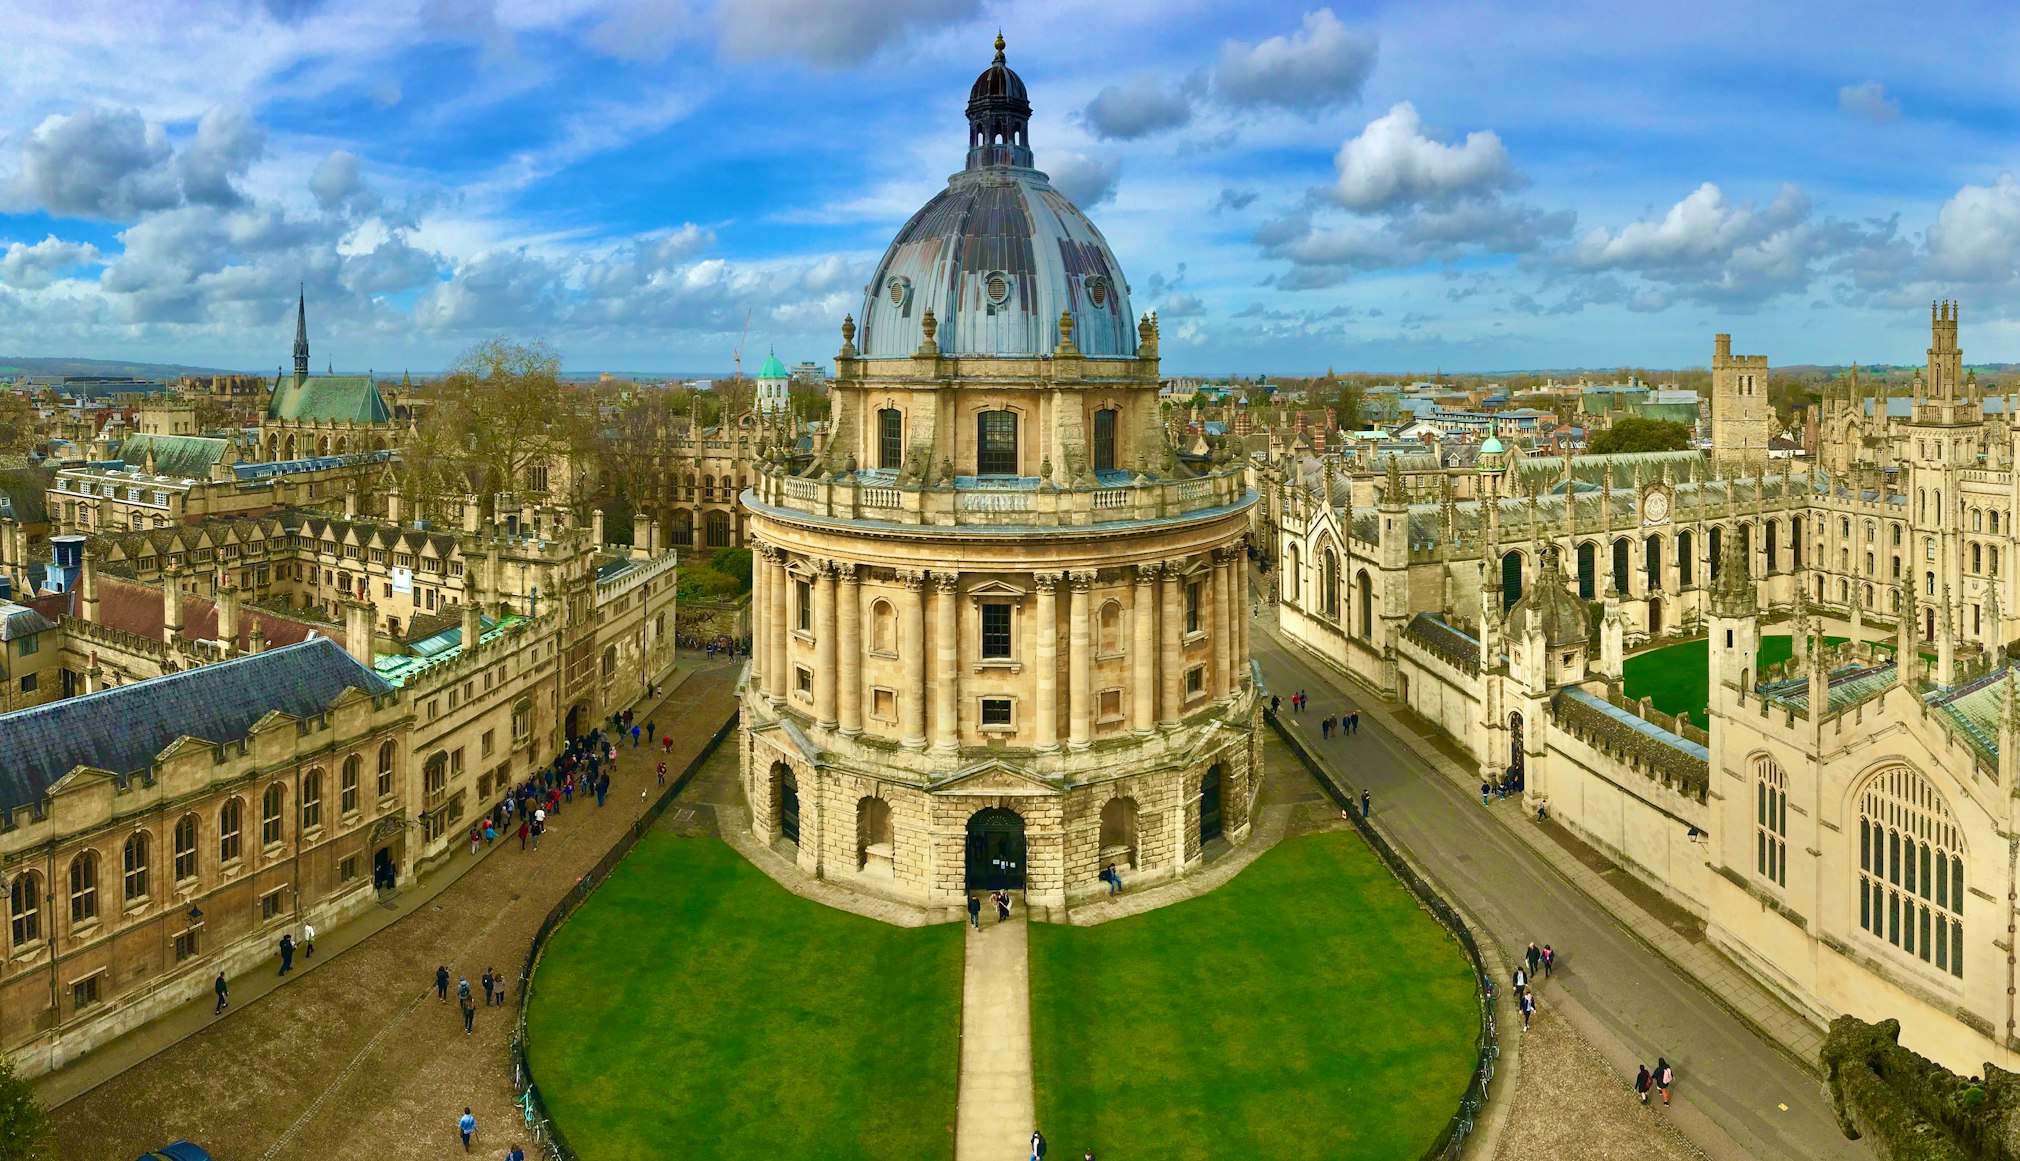 oxford is one of the universities in uk